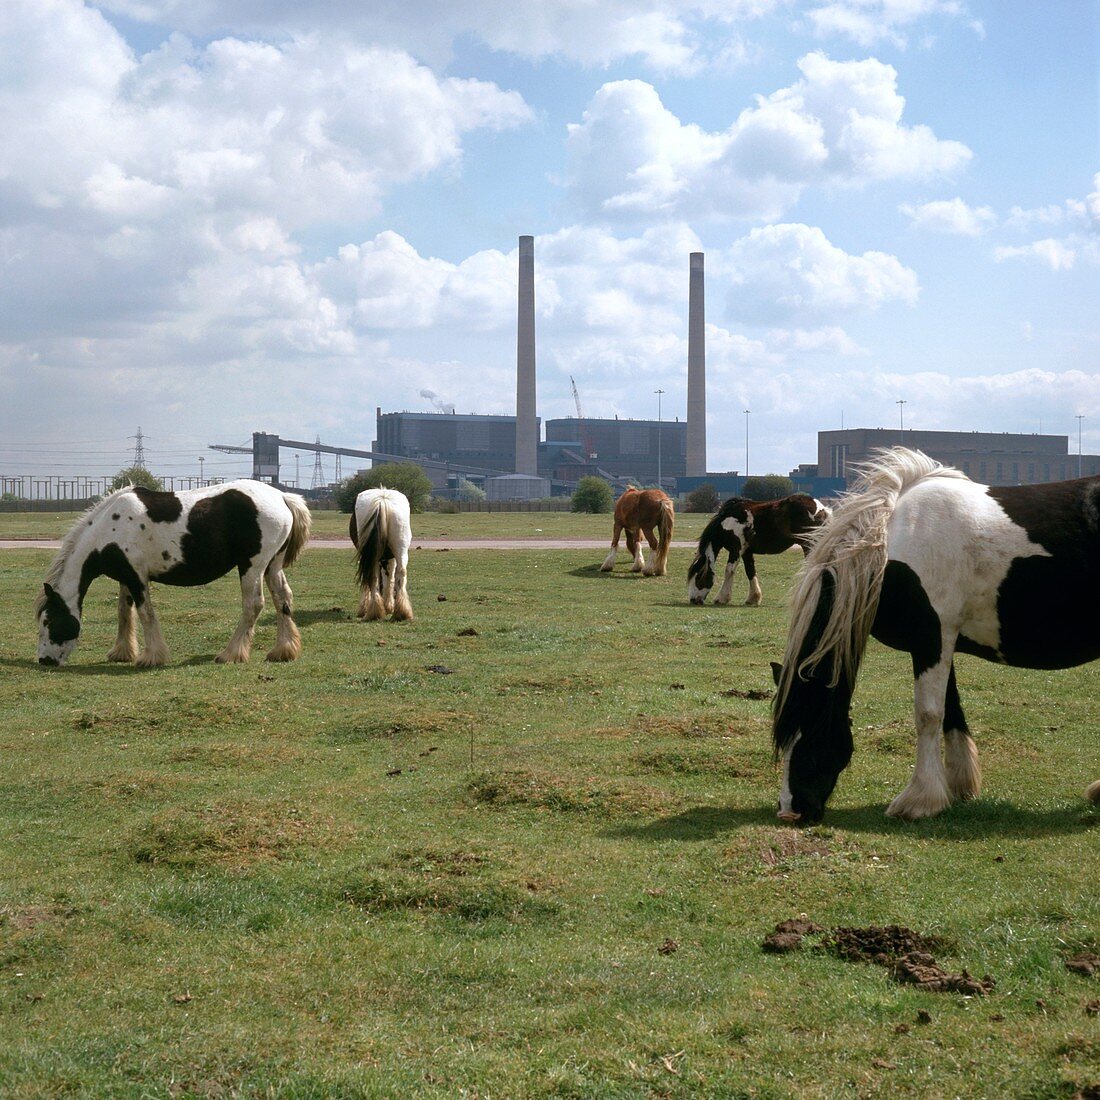 Horses grazing near a power station